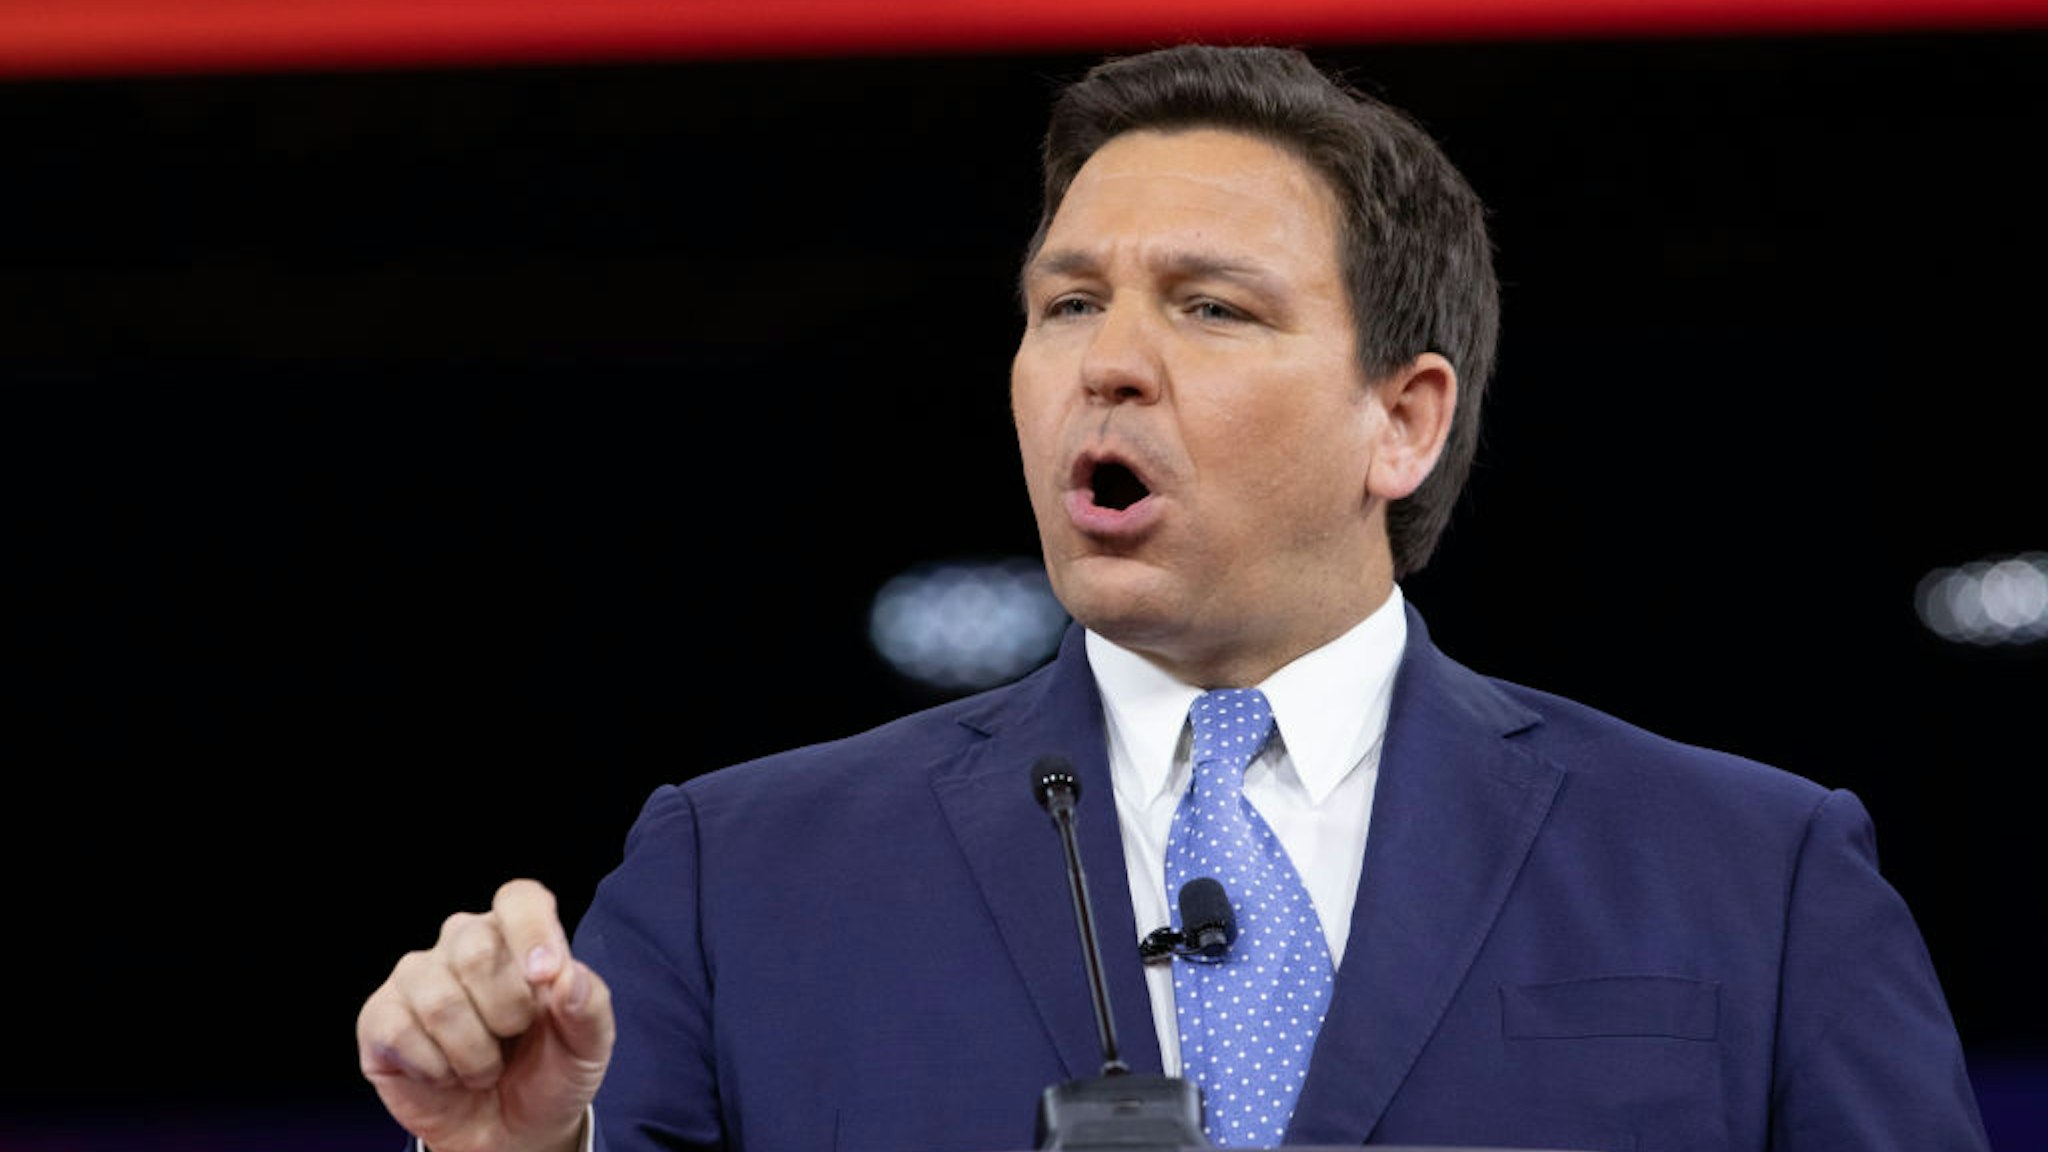 Ron DeSantis, governor of Florida, speaks during the Conservative Political Action Conference (CPAC) in Orlando, Florida, U.S., on Thursday, Feb. 24, 2022. Launched in 1974, the Conservative Political Action Conference is the largest gathering of conservatives in the world. Photographer: Tristan Wheelock/Bloomberg via Getty Images